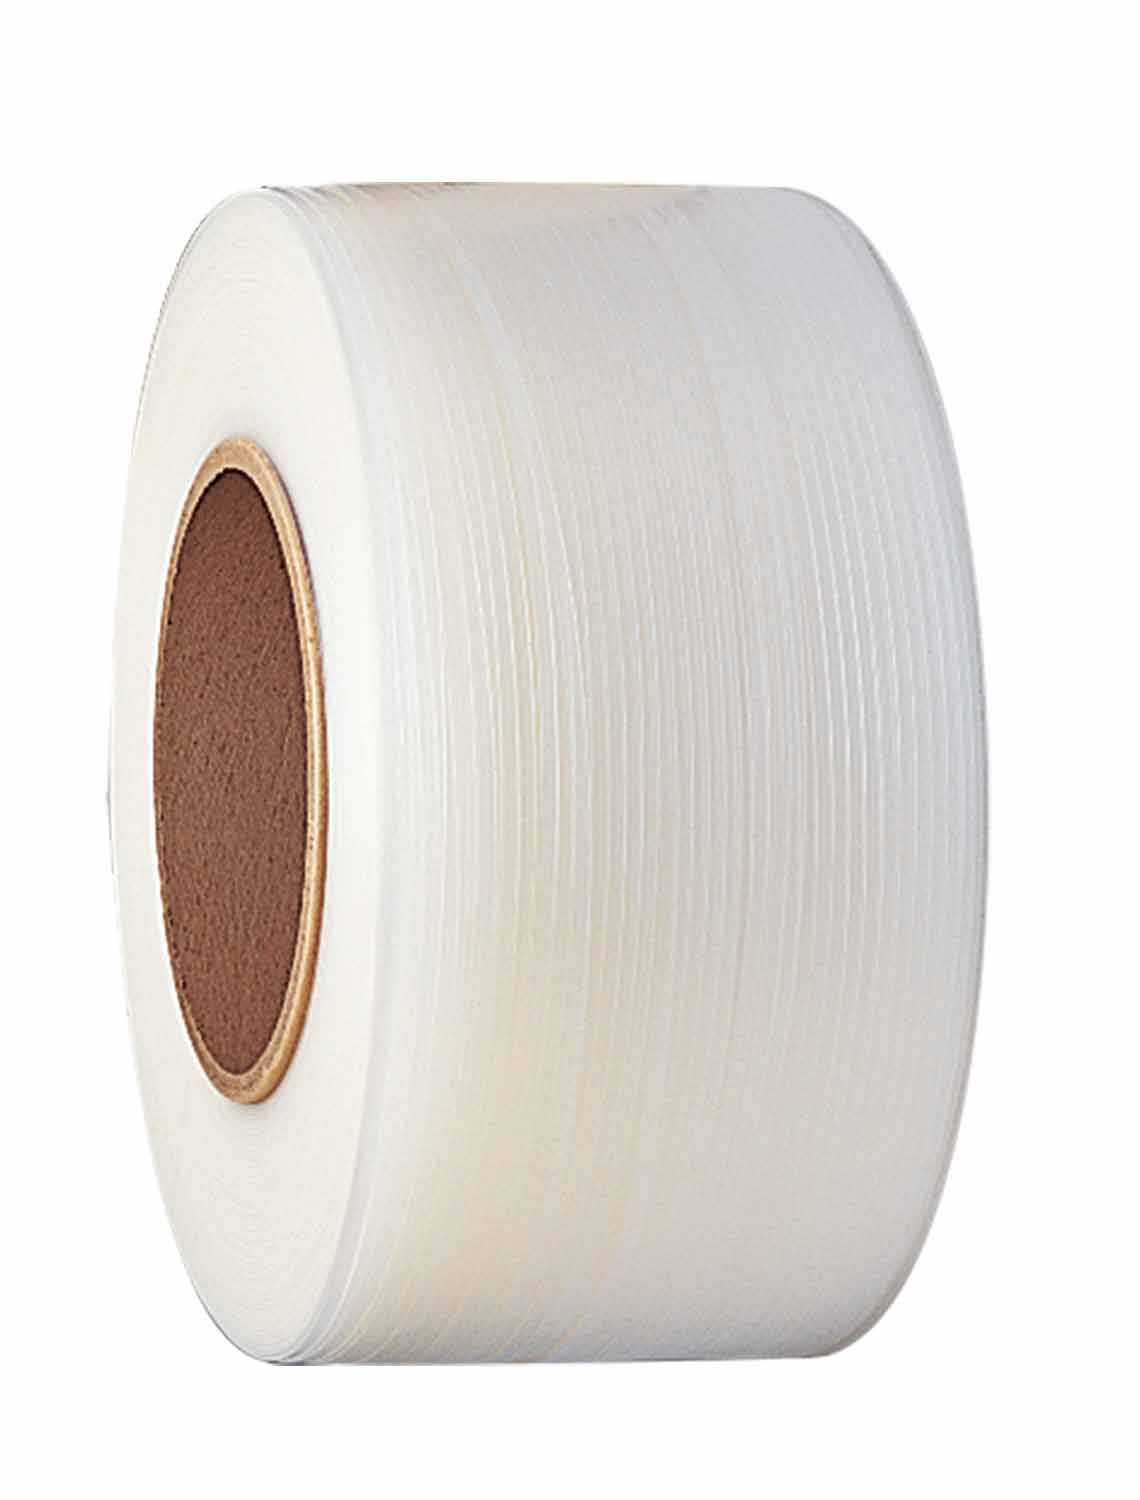 PLASTIC STRAPPING CLEAR 3/16&quot;
(5mm) 120 LB. 828 POLYPROYLENE
SIGNODE CONTRAX